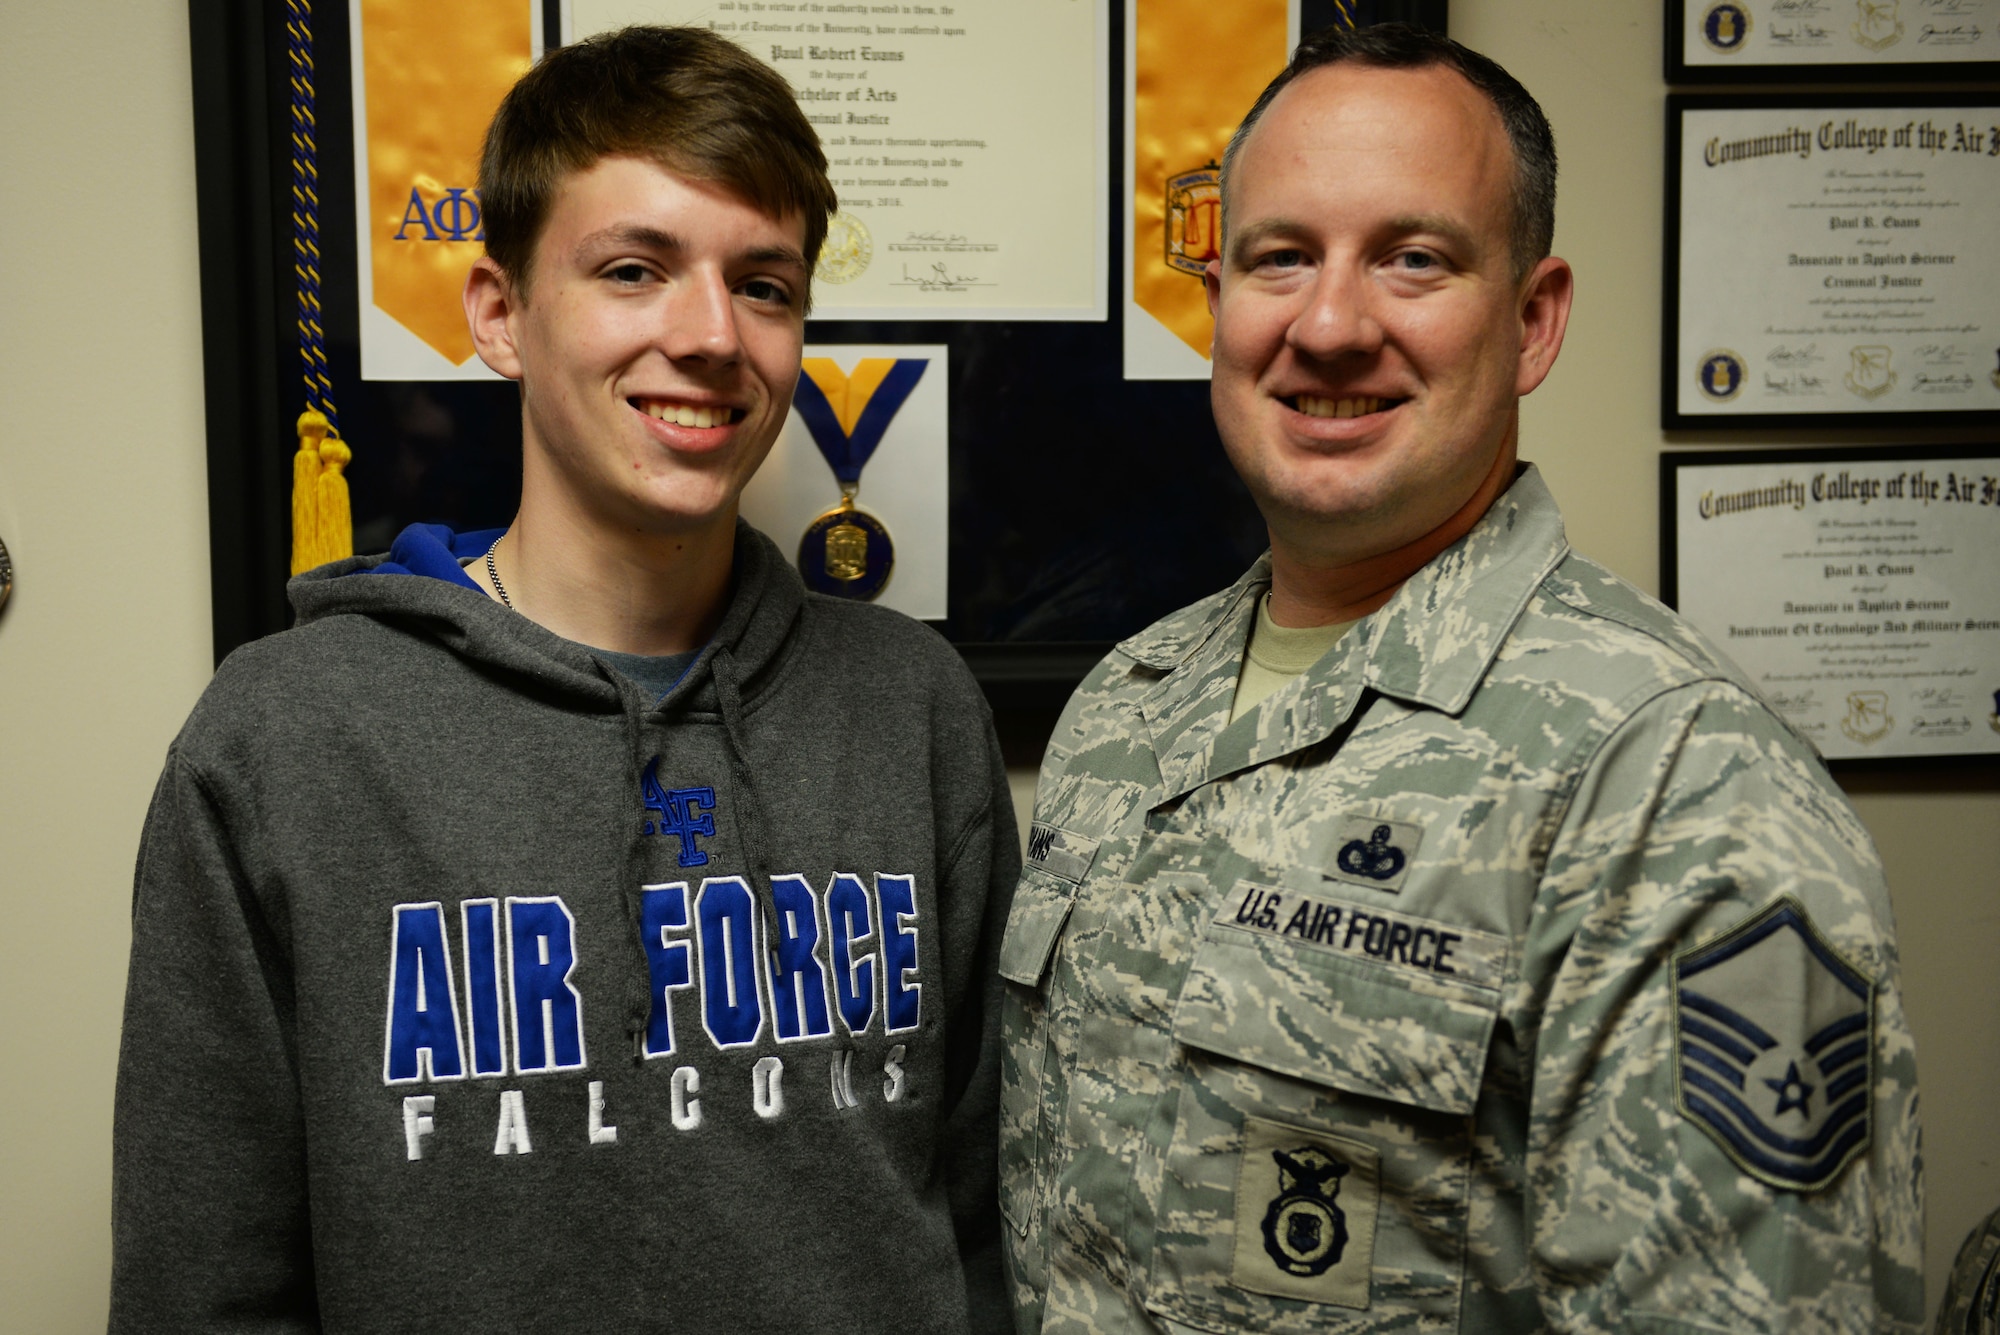 David, Master Sgt. Paul Evan’s son, is carrying on the legacy of service by being accepted by the U.S. Air Force Academy. David joined Junior Reserve Officer Training Corps to learn as much about the military as he could. (U.S. Air Force photo by Airman Rhett Isbell)